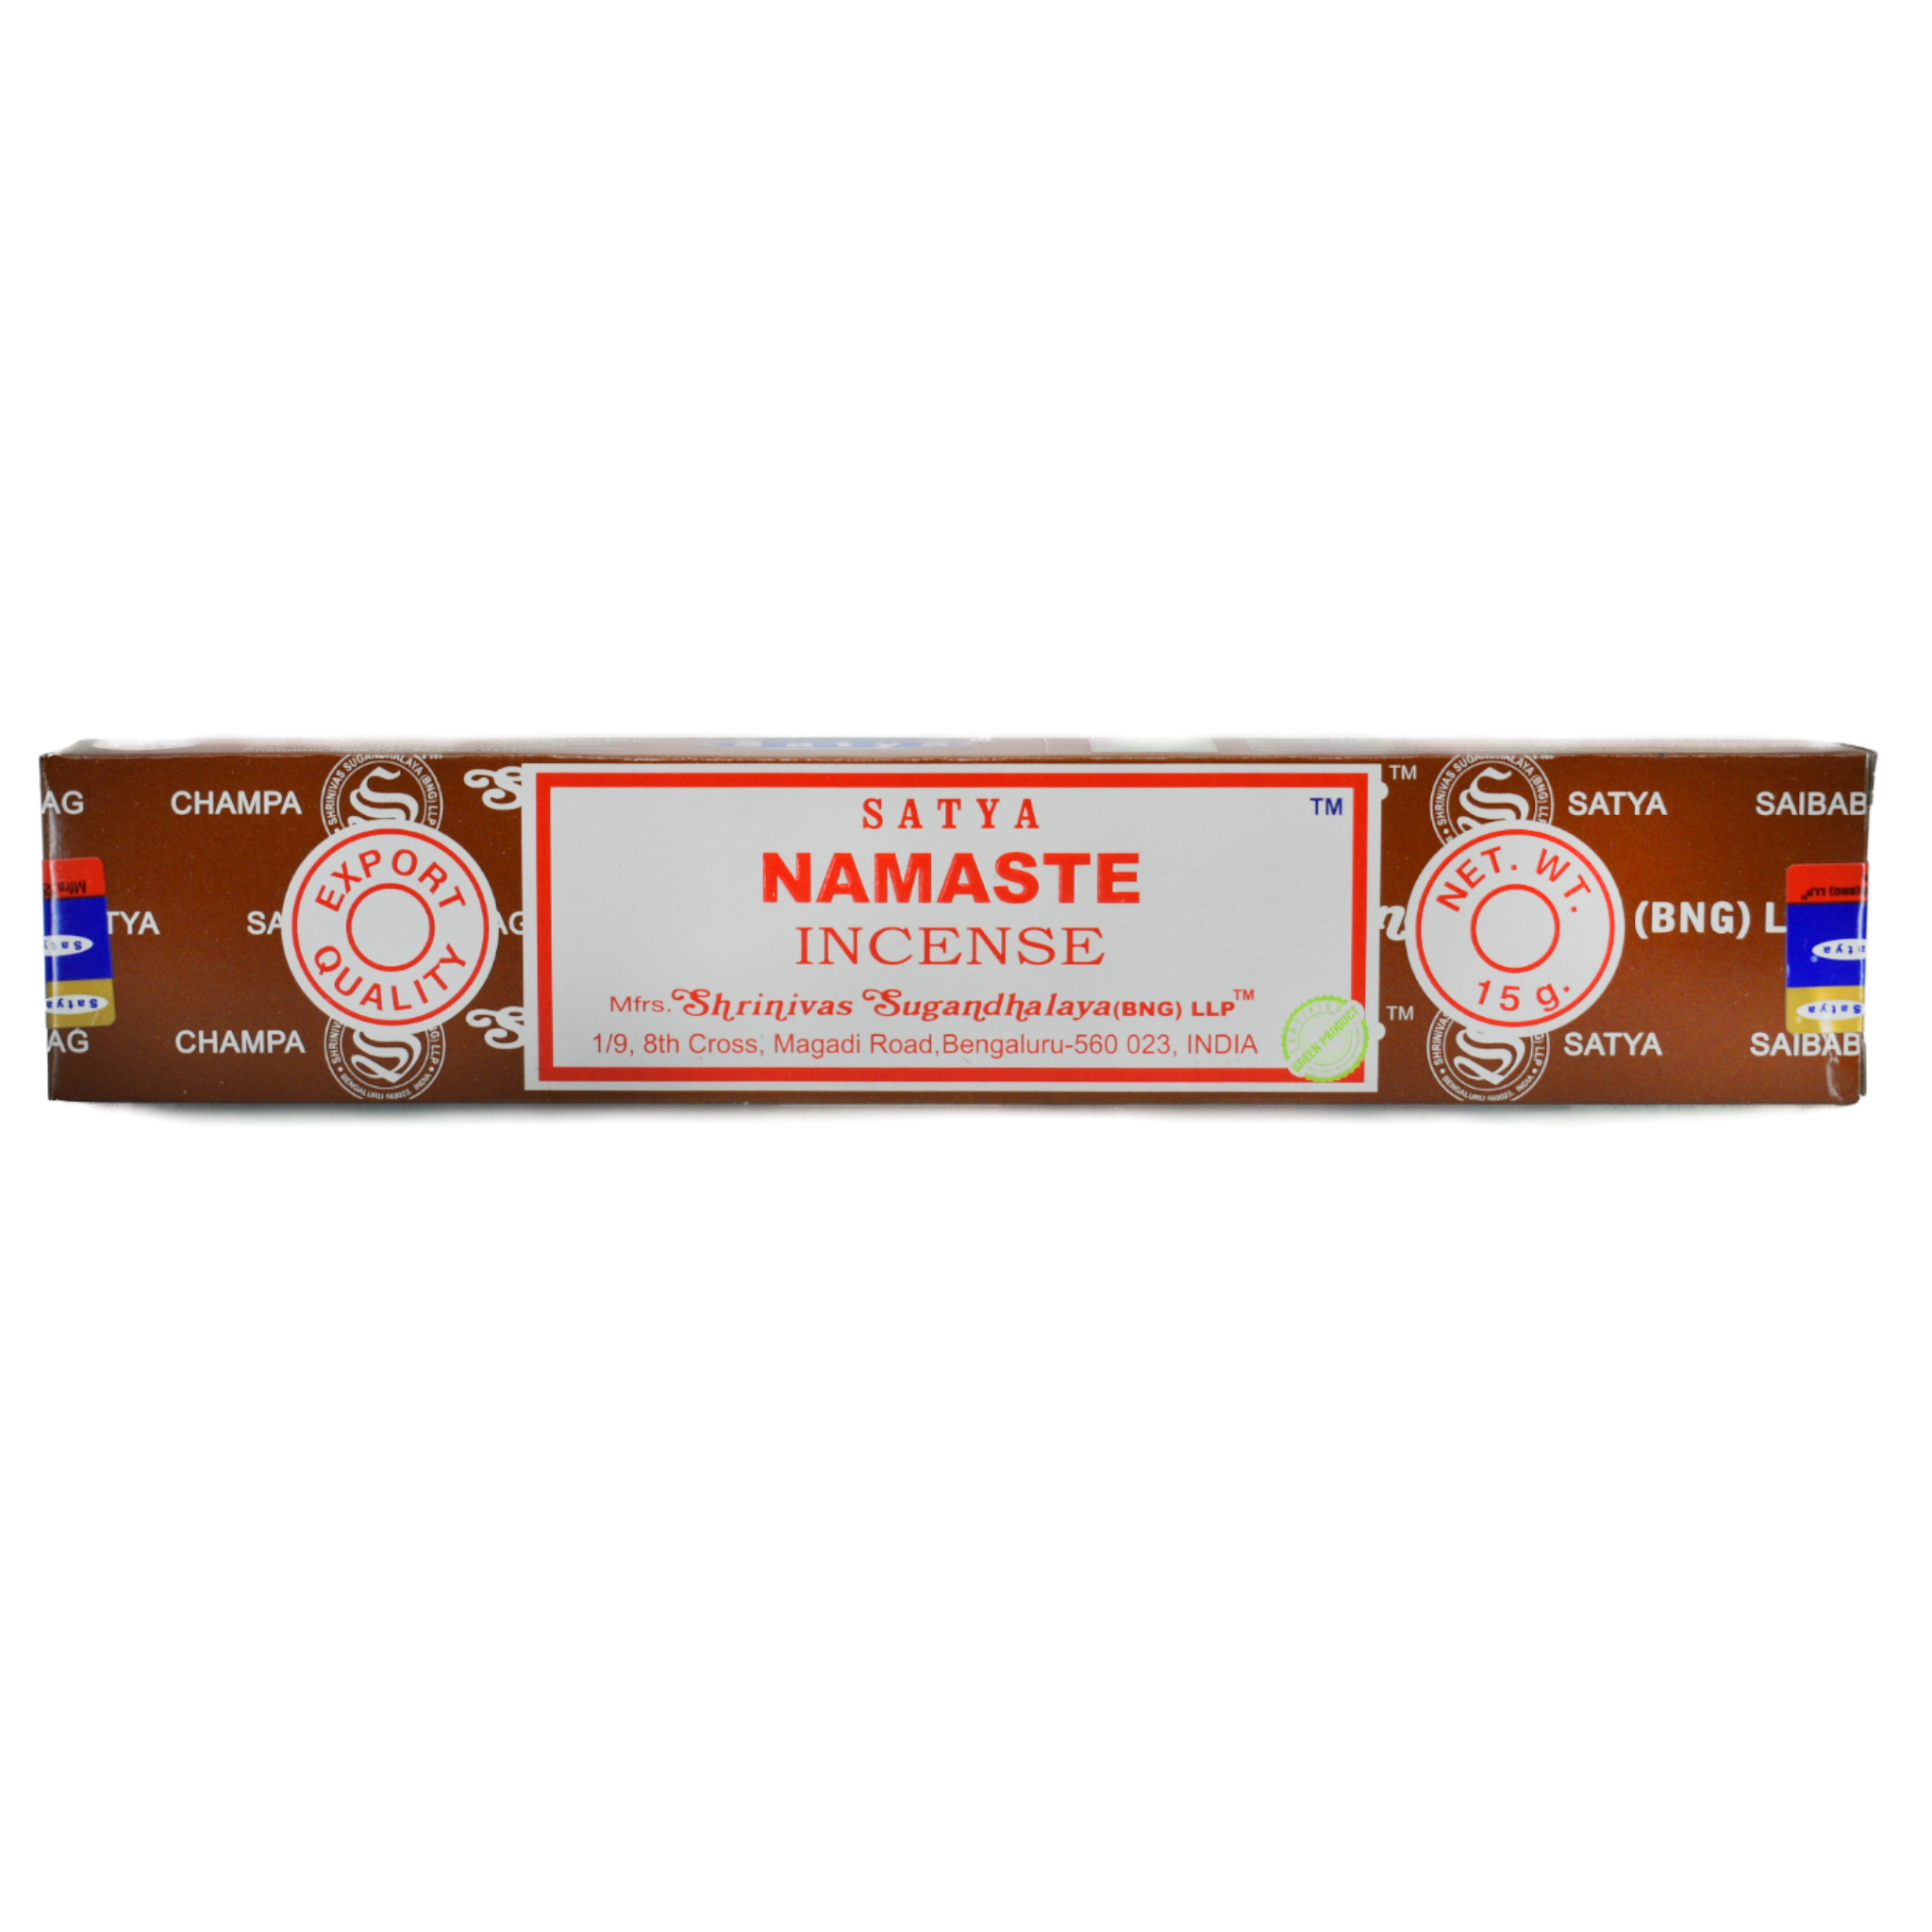 Namaste Incense Sticks.  Box is brown with white lines that have company words as a design. The center of the box has a white rectangle with a red frame within the border. In the rectangle the top line has the company name. The next rows have the title Namaste Incense. At the bottom of the rectangle is the manufacturer's information. On both sides are a circle. The left circle says Export Quality and the right side circle says Net. Weight 15 grams.